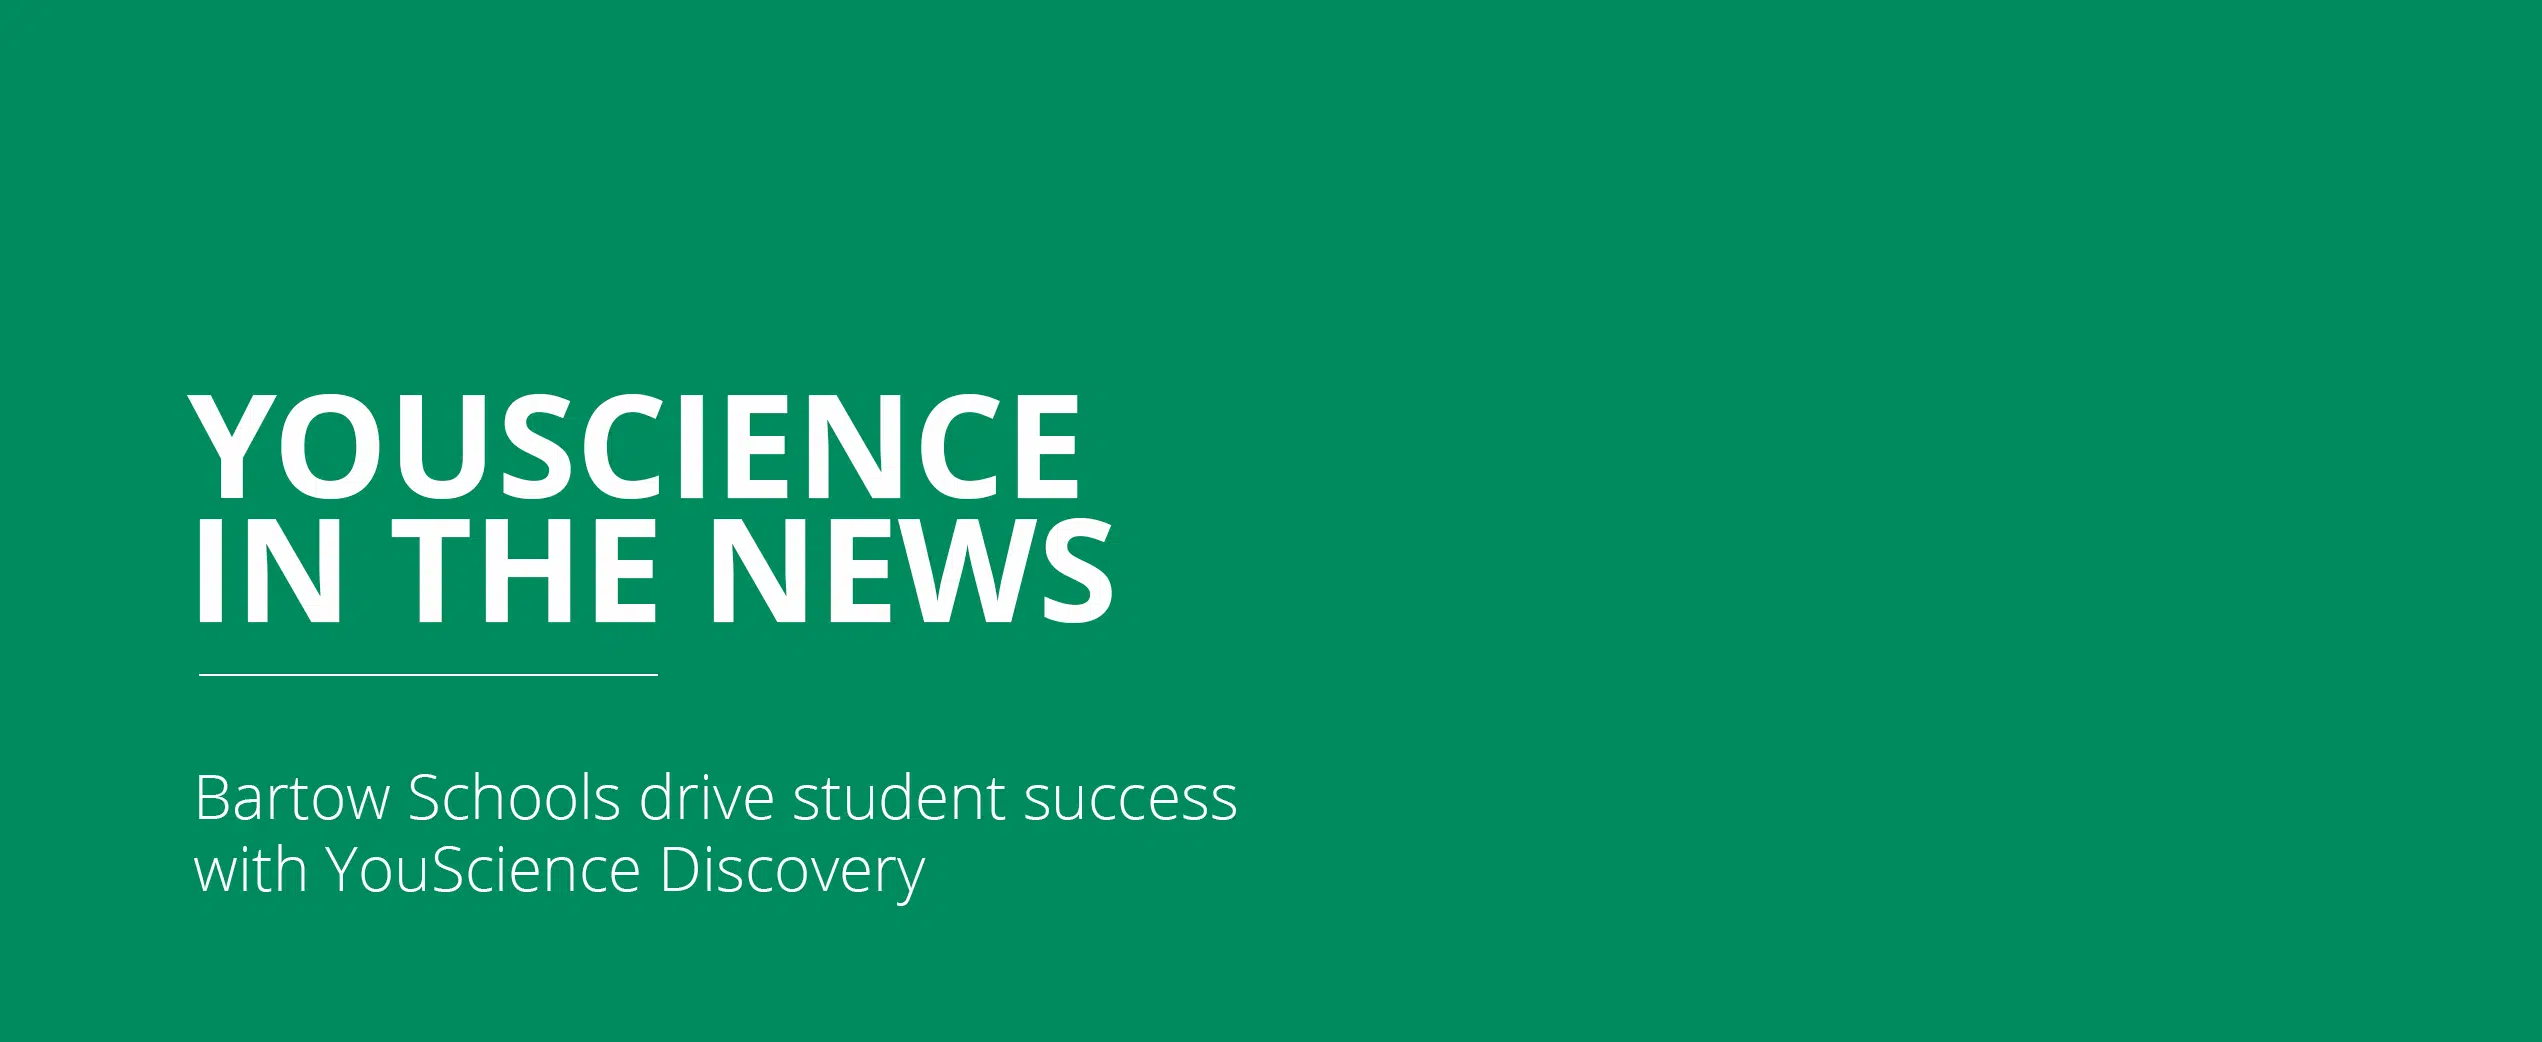 Bartow Schools drive student success with YouScience Discovery